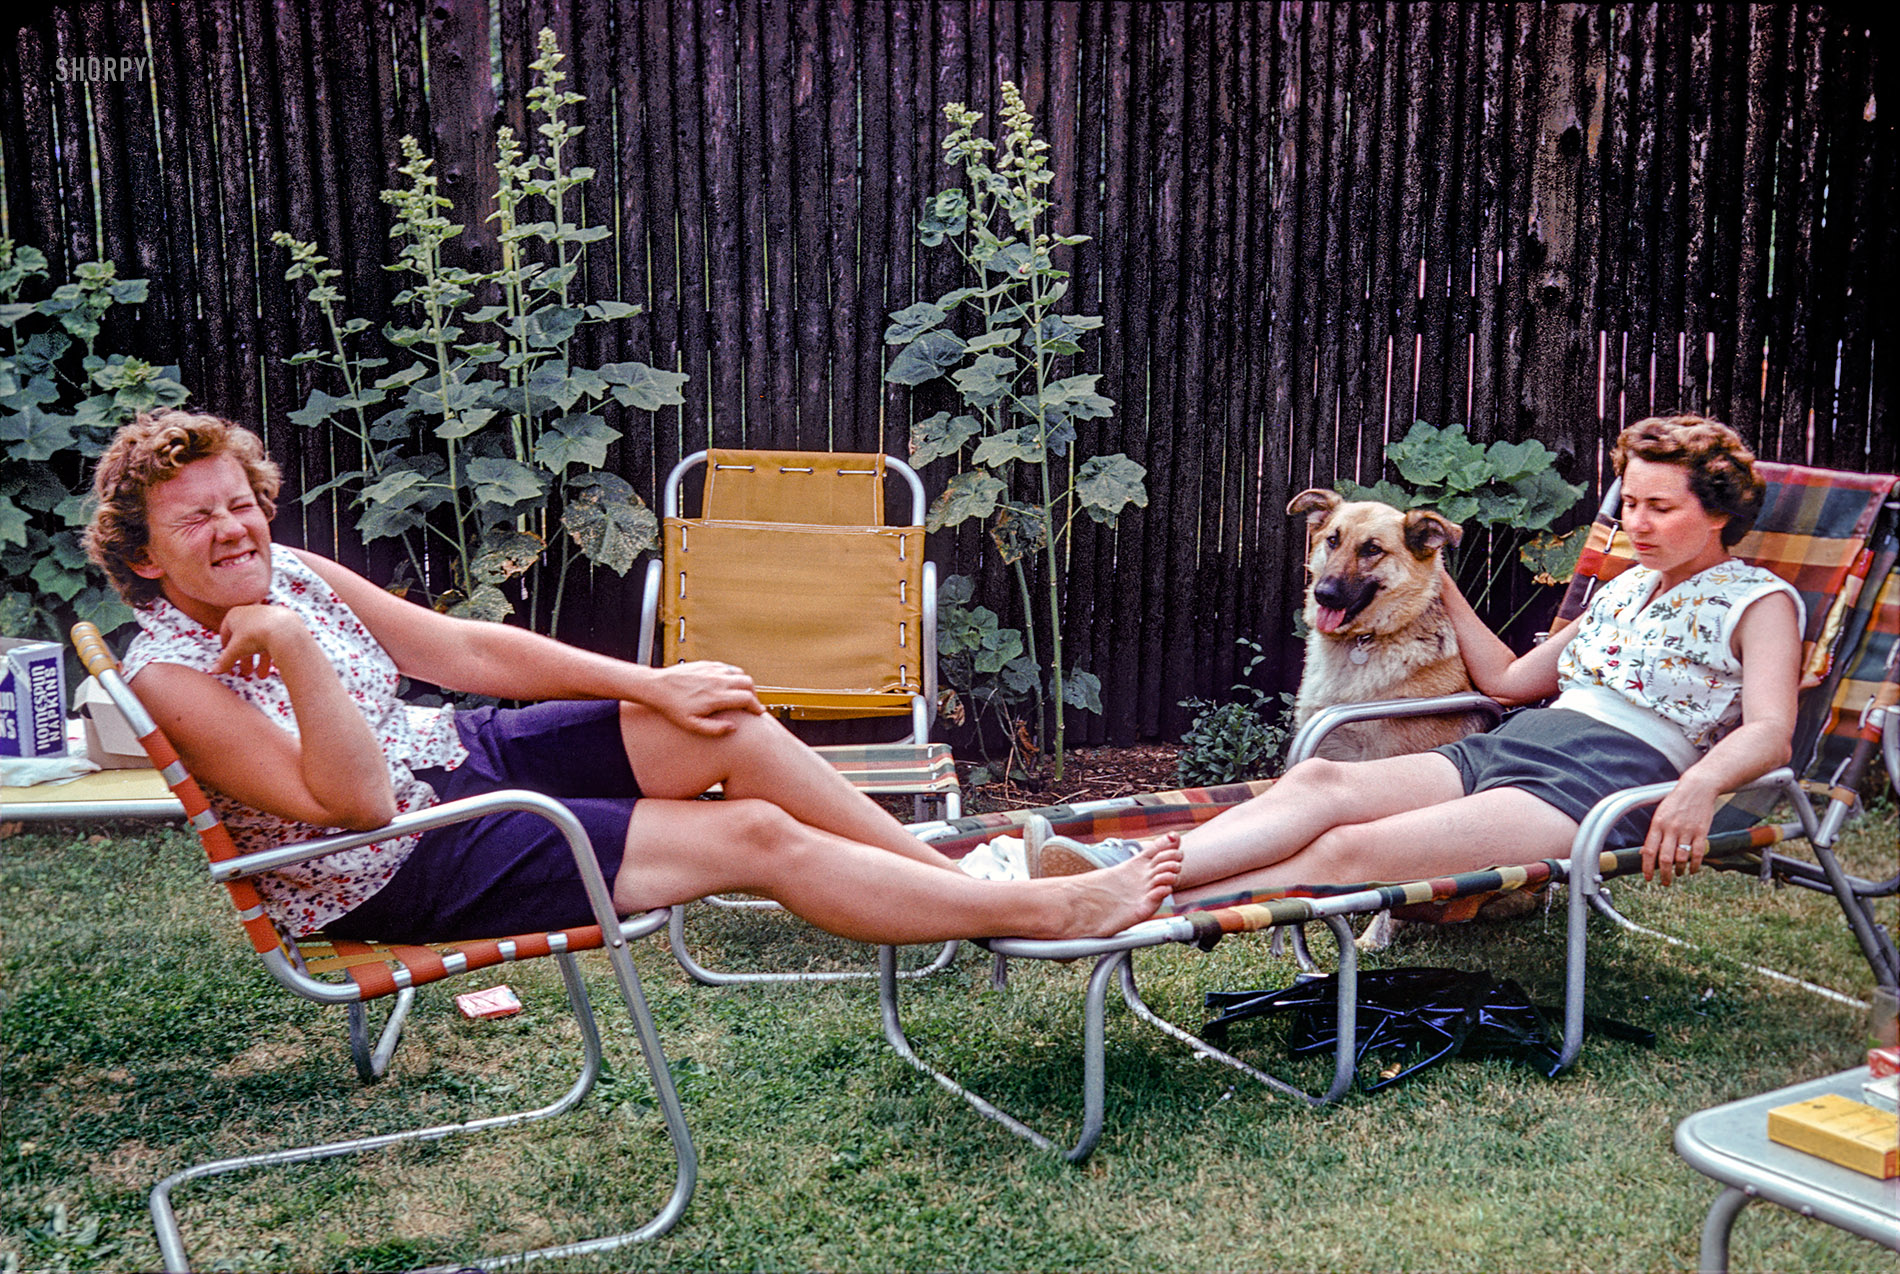 Circa 1950, Linda's mom at right with someone who might be her sister, and someone else who is definitely a dog. And, for those of you keeping track, the third box of paper napkins in this batch of 35mm Kodachromes.  View full size.